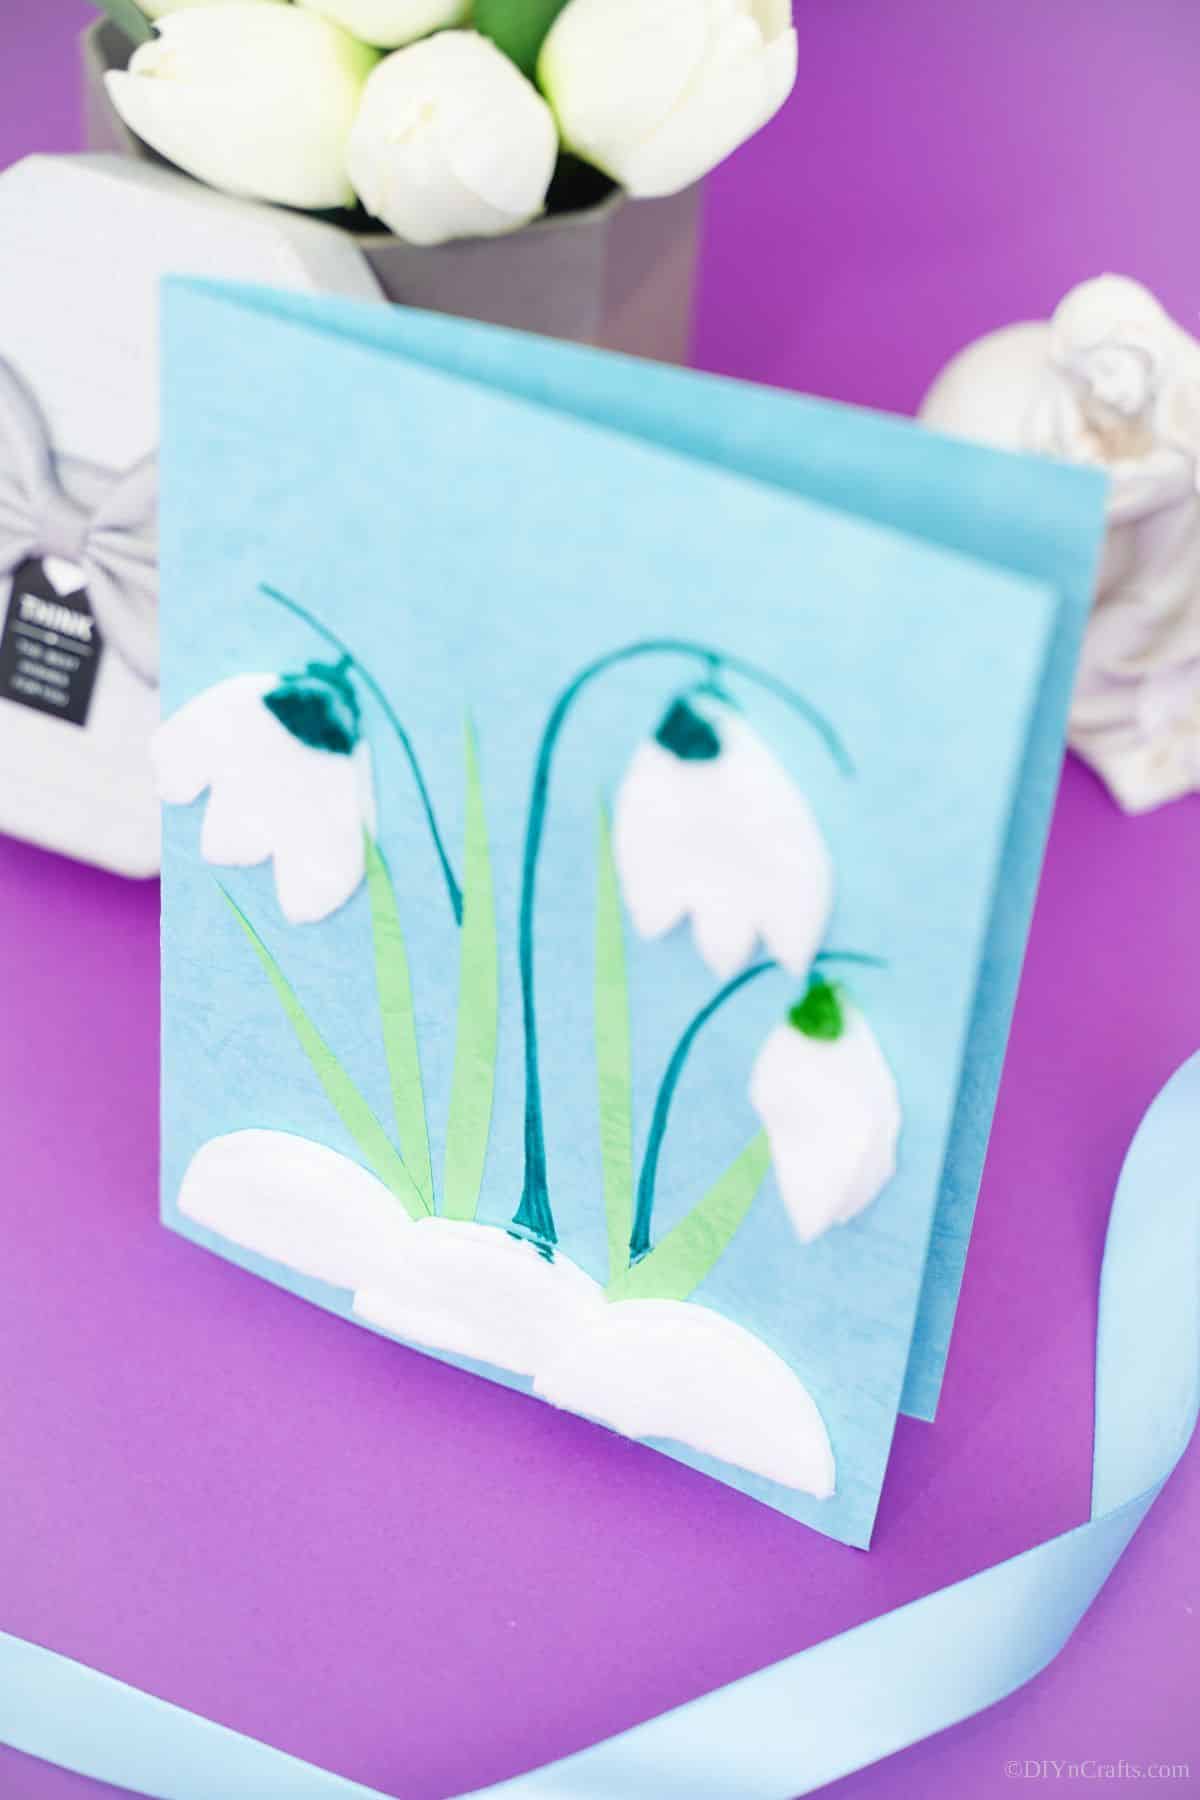 blue and white card with tulips sitting on purple surface